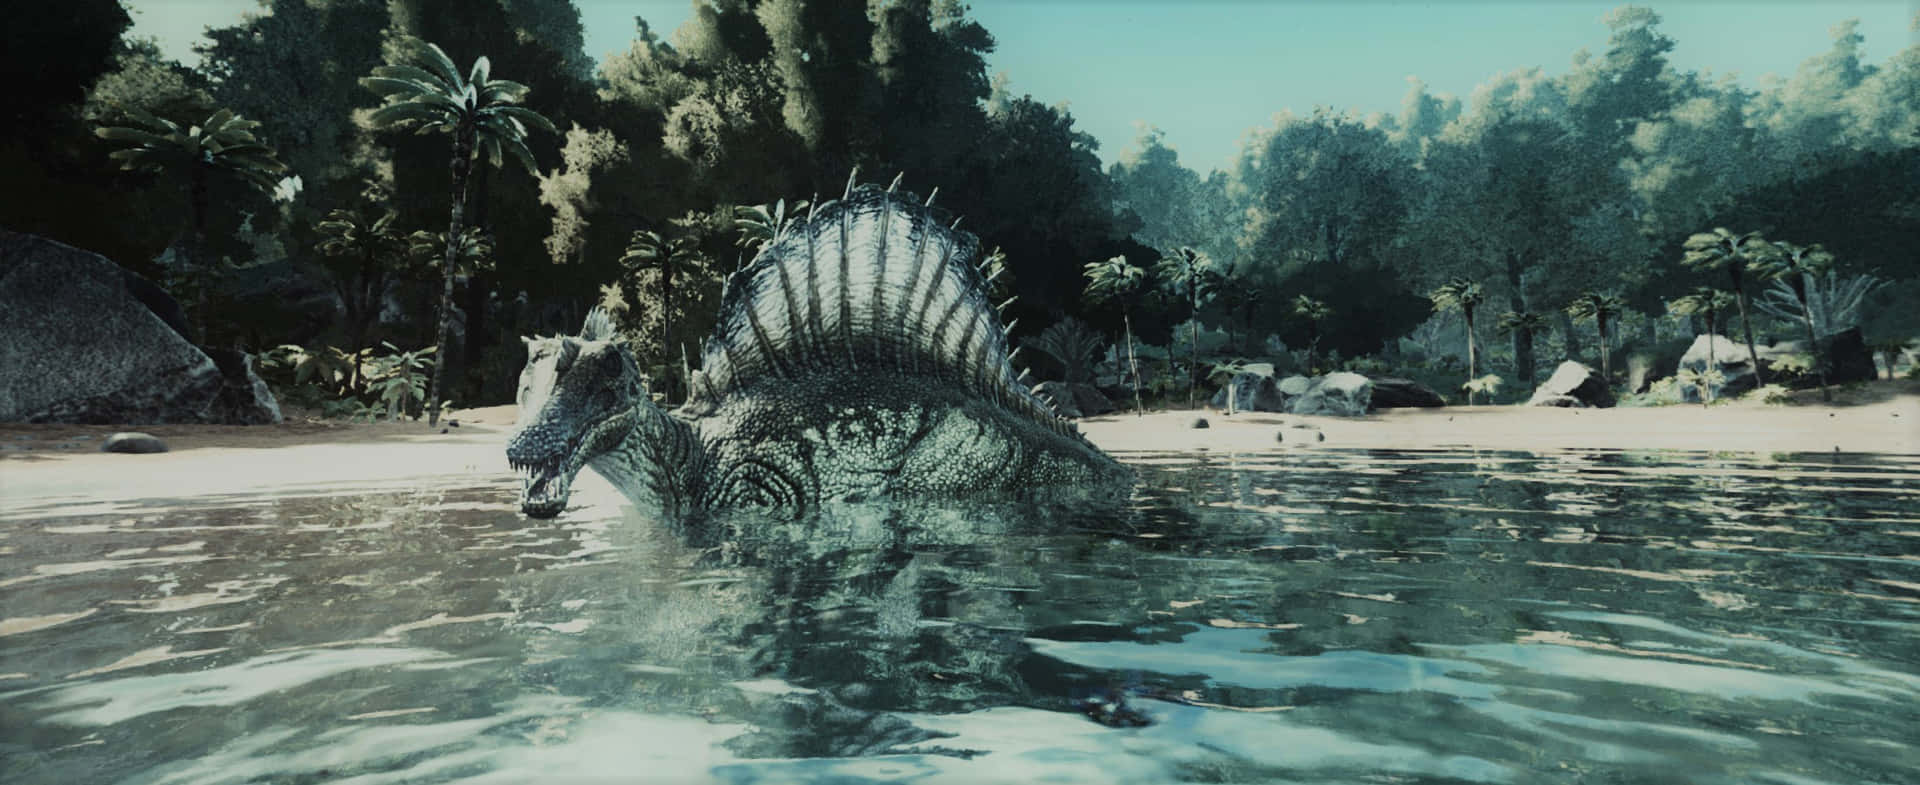 A Large Dinosaur Is Swimming In The Water Wallpaper